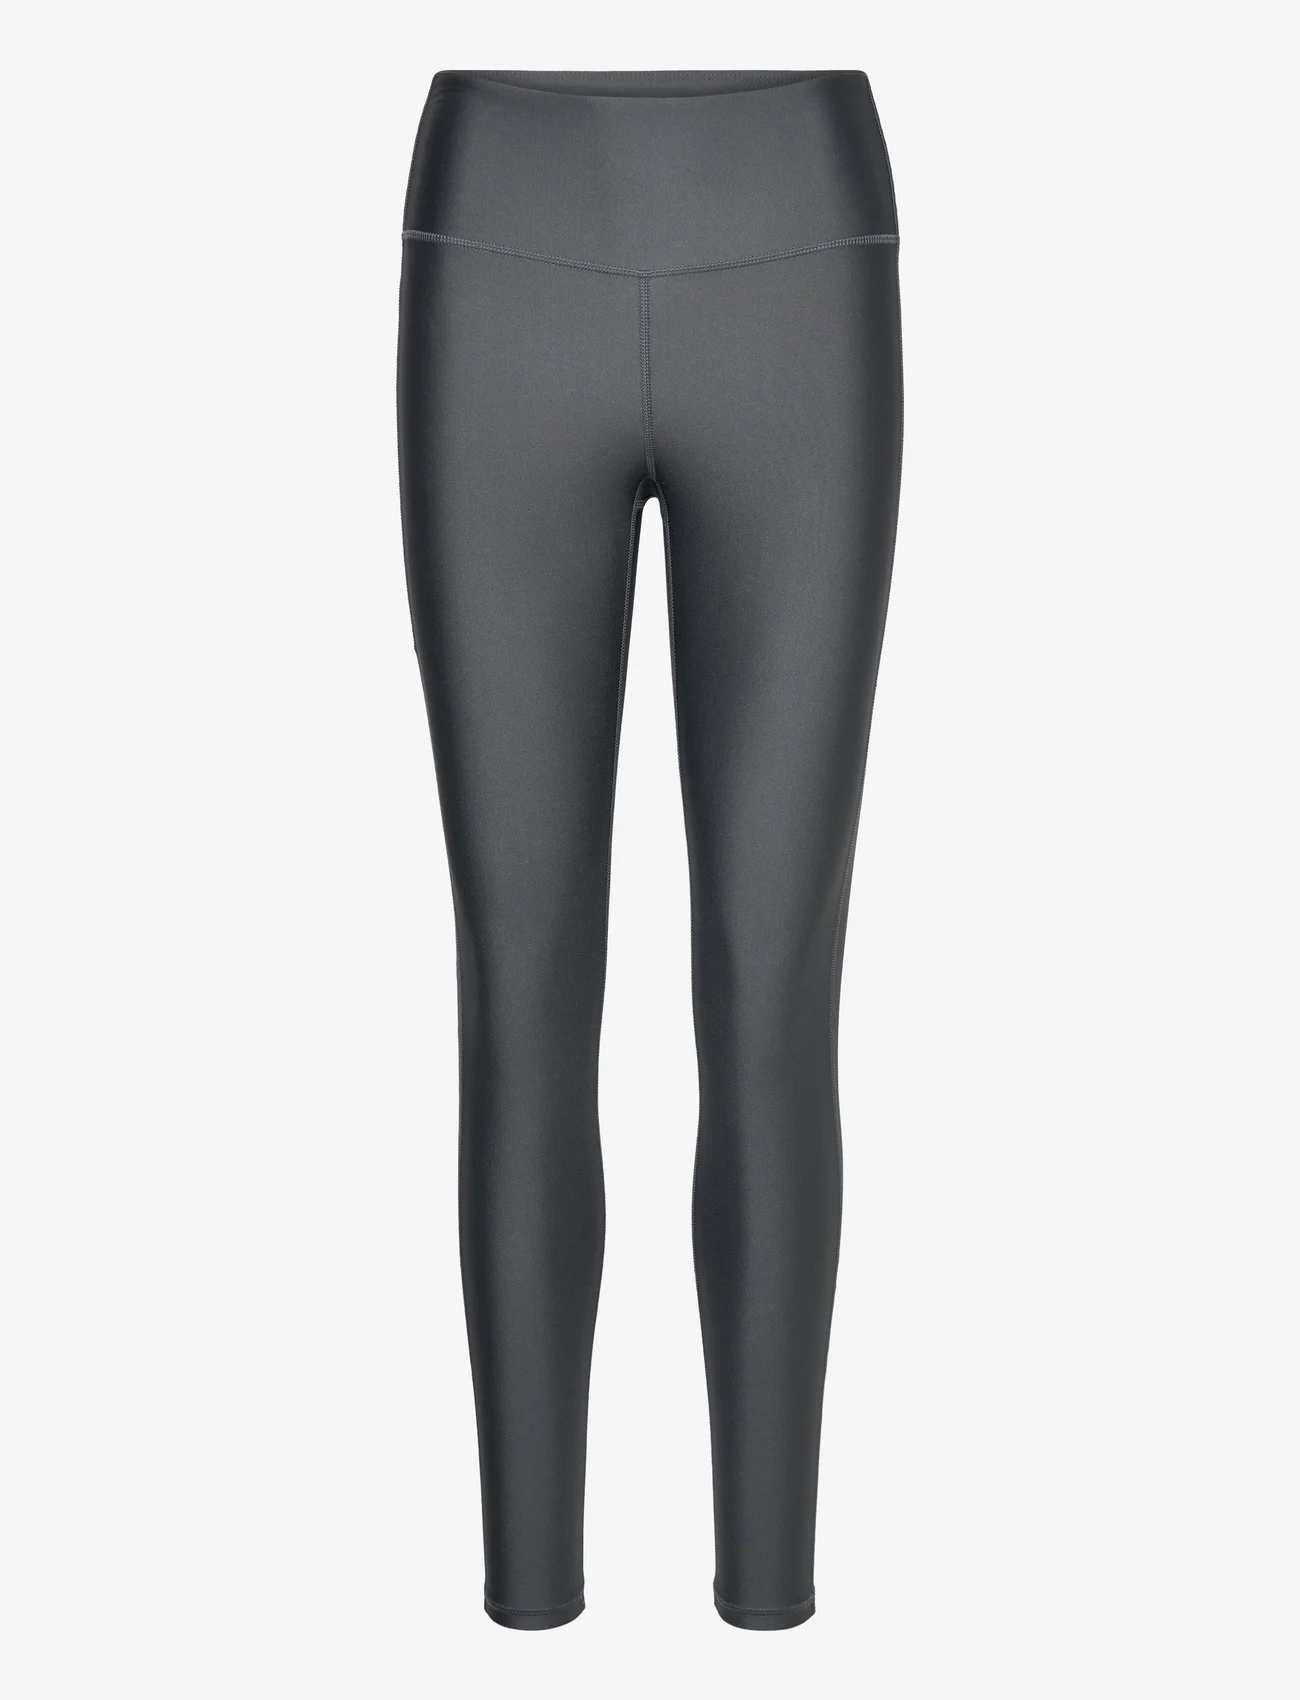 Under Armour - Armour Branded Legging - løpe-& treningstights - pitch gray - 0